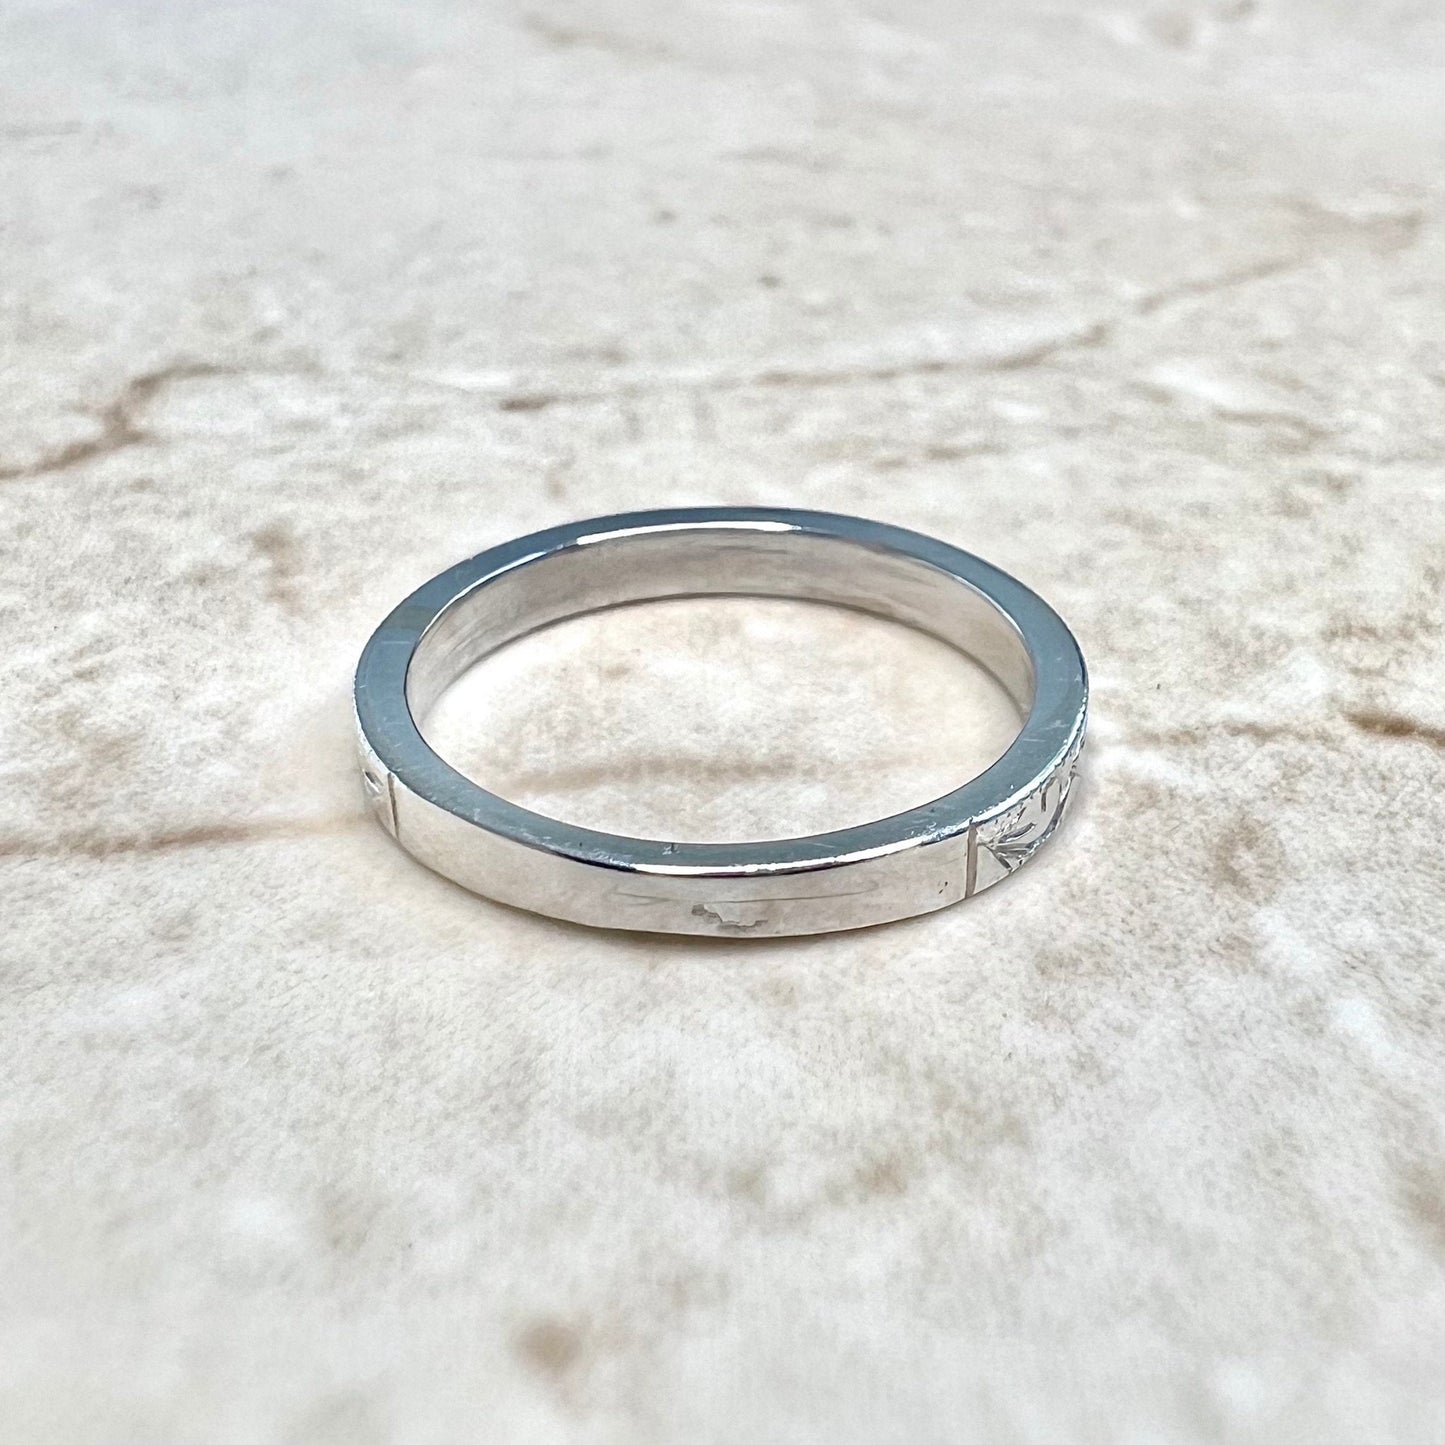 14K Antique Wedding Band Ring - Edwardian White Gold Wedding Ring - Engraved White Gold Band - White Gold Wedding Ring - Best Gifts For Her